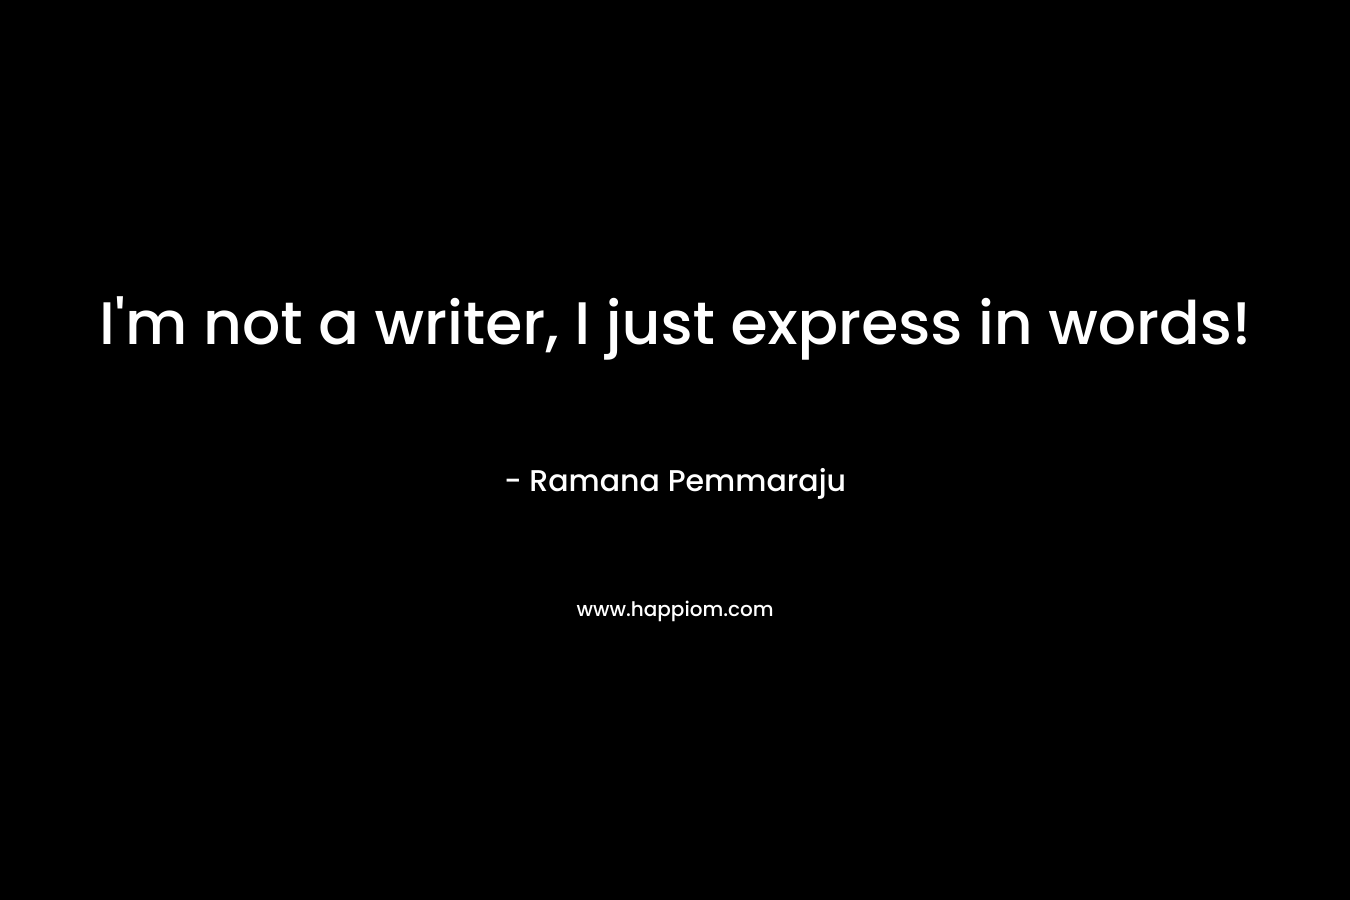 I'm not a writer, I just express in words!